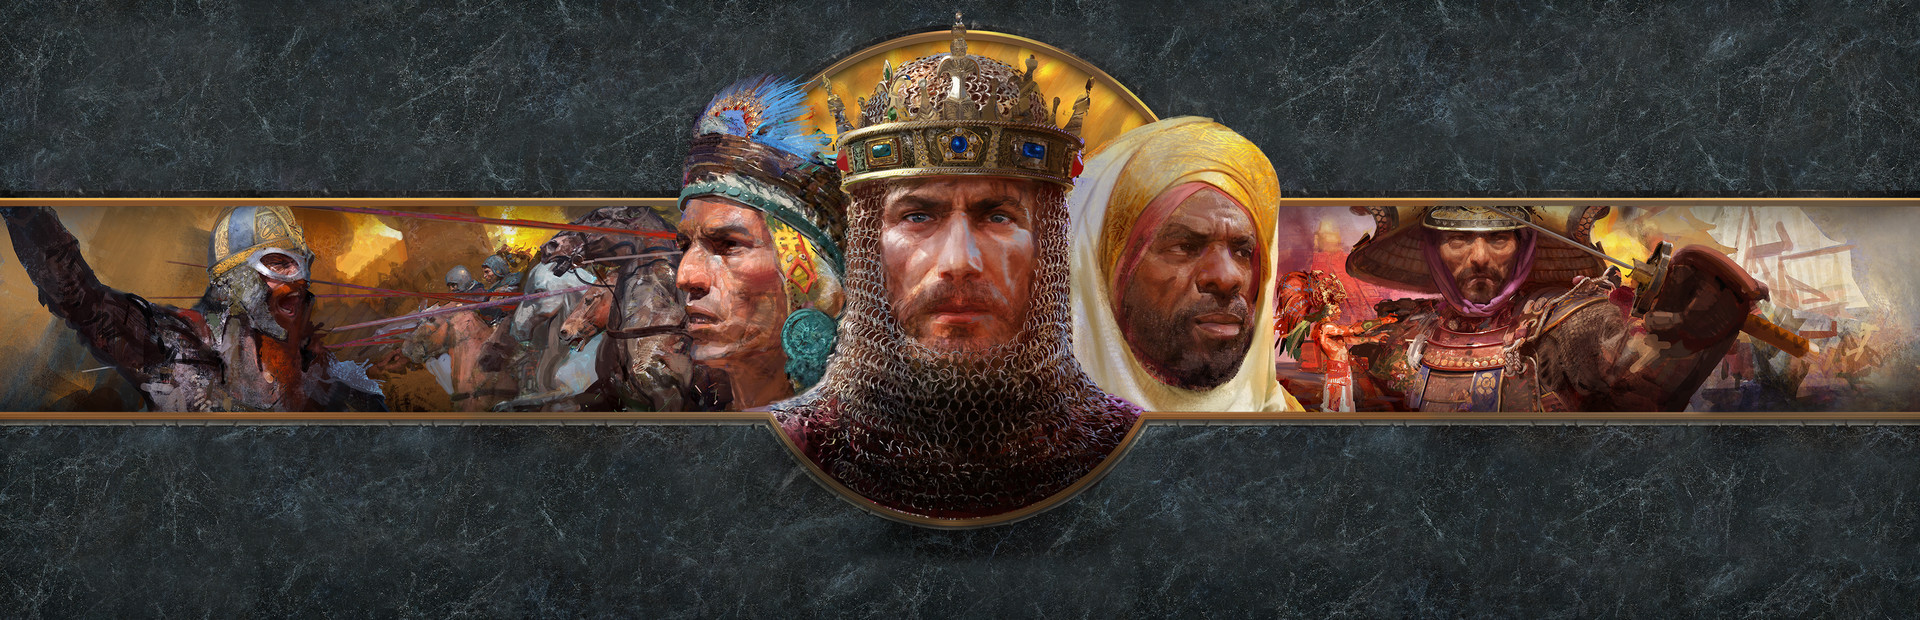 Age of Empires II: Definitive Edition cover image